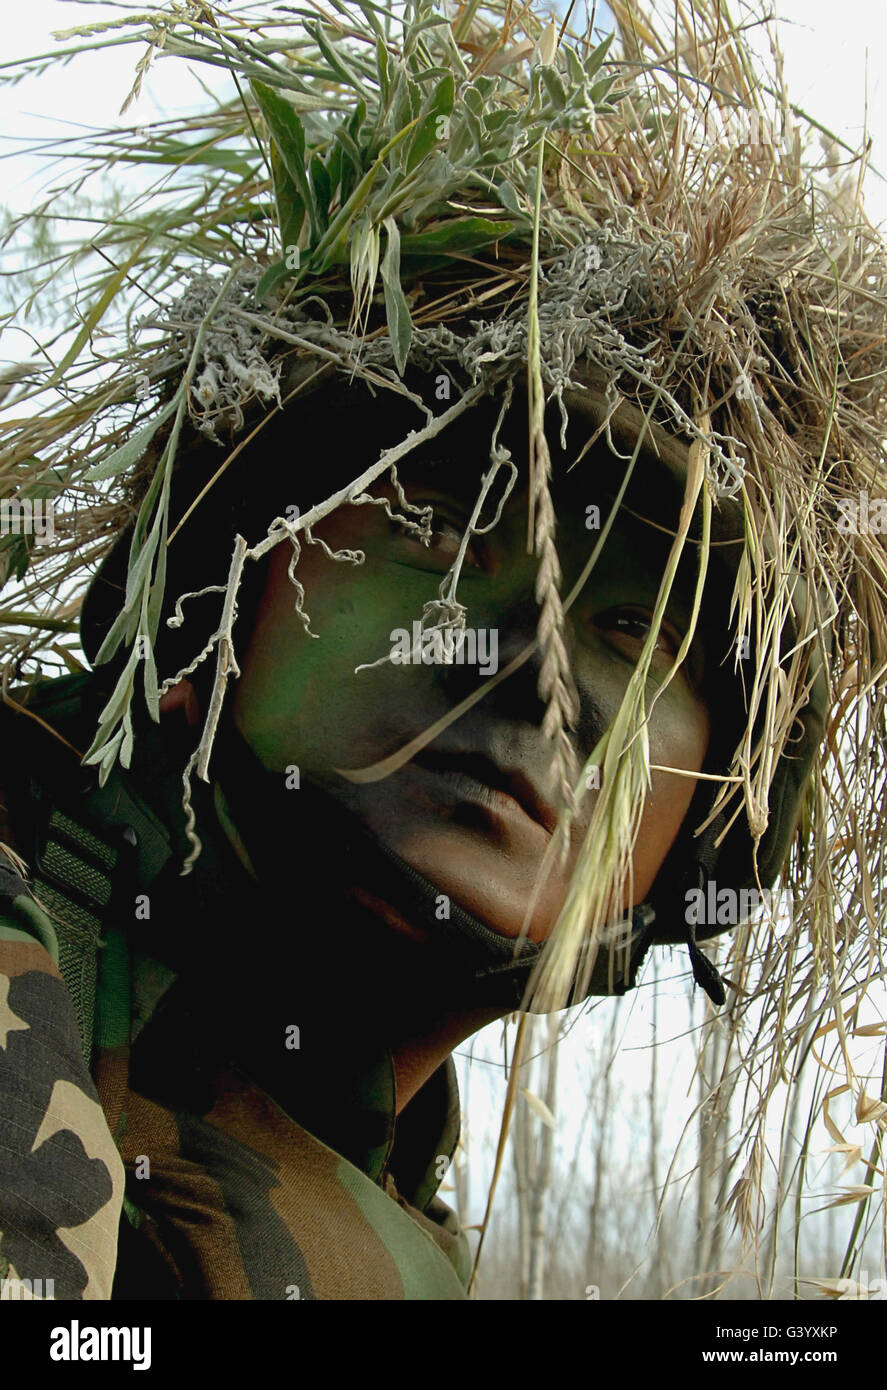 Airman wearing a ghillie suit and camouflage face paint. Stock Photo